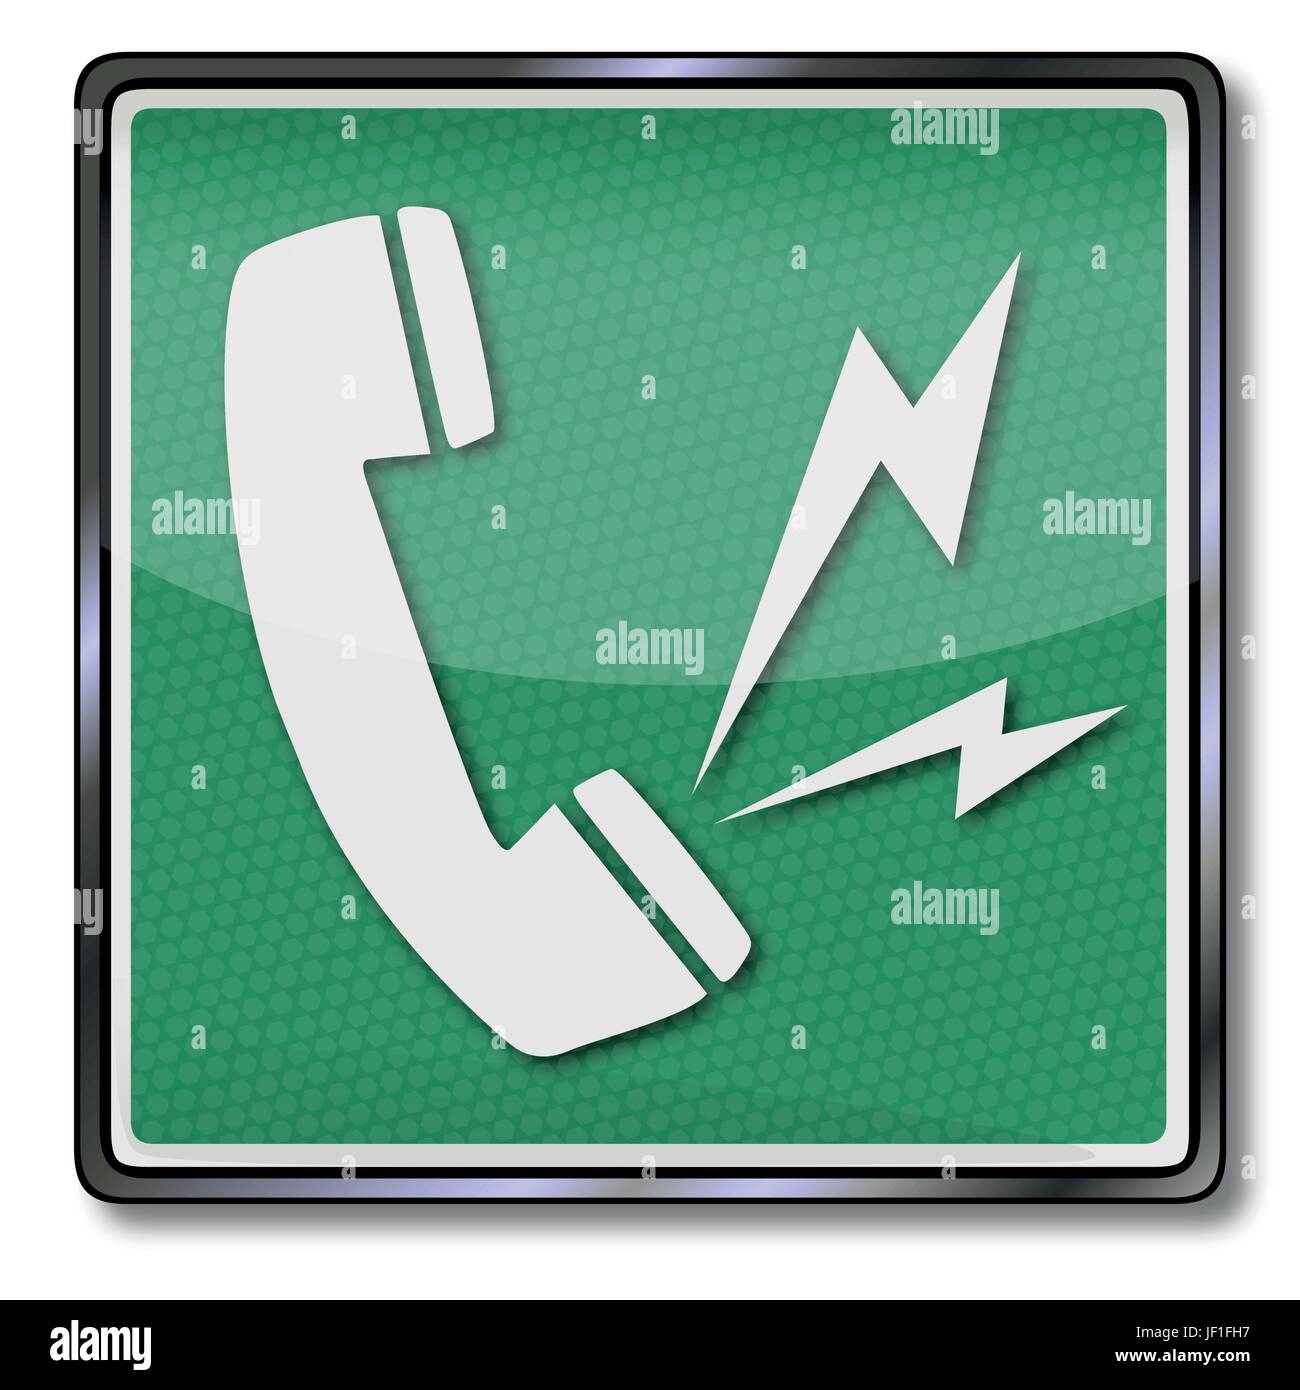 telephone, phone, monitoring, bug, demolition, scrapping, telephone, phone, Stock Vector